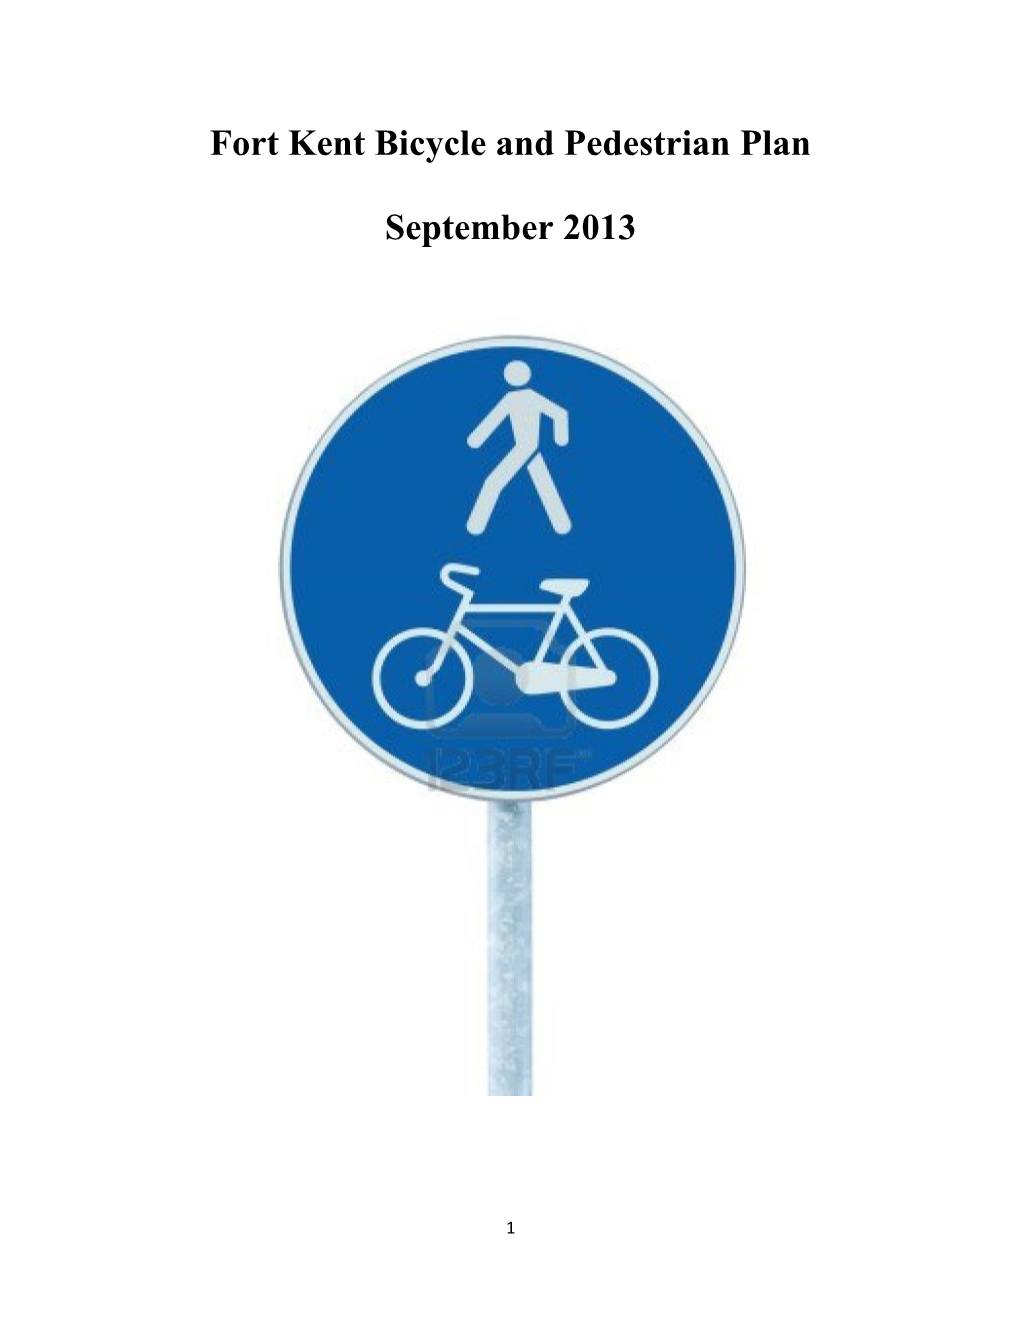 Fort Kent Bicycle and Pedestrian Plan September 2013